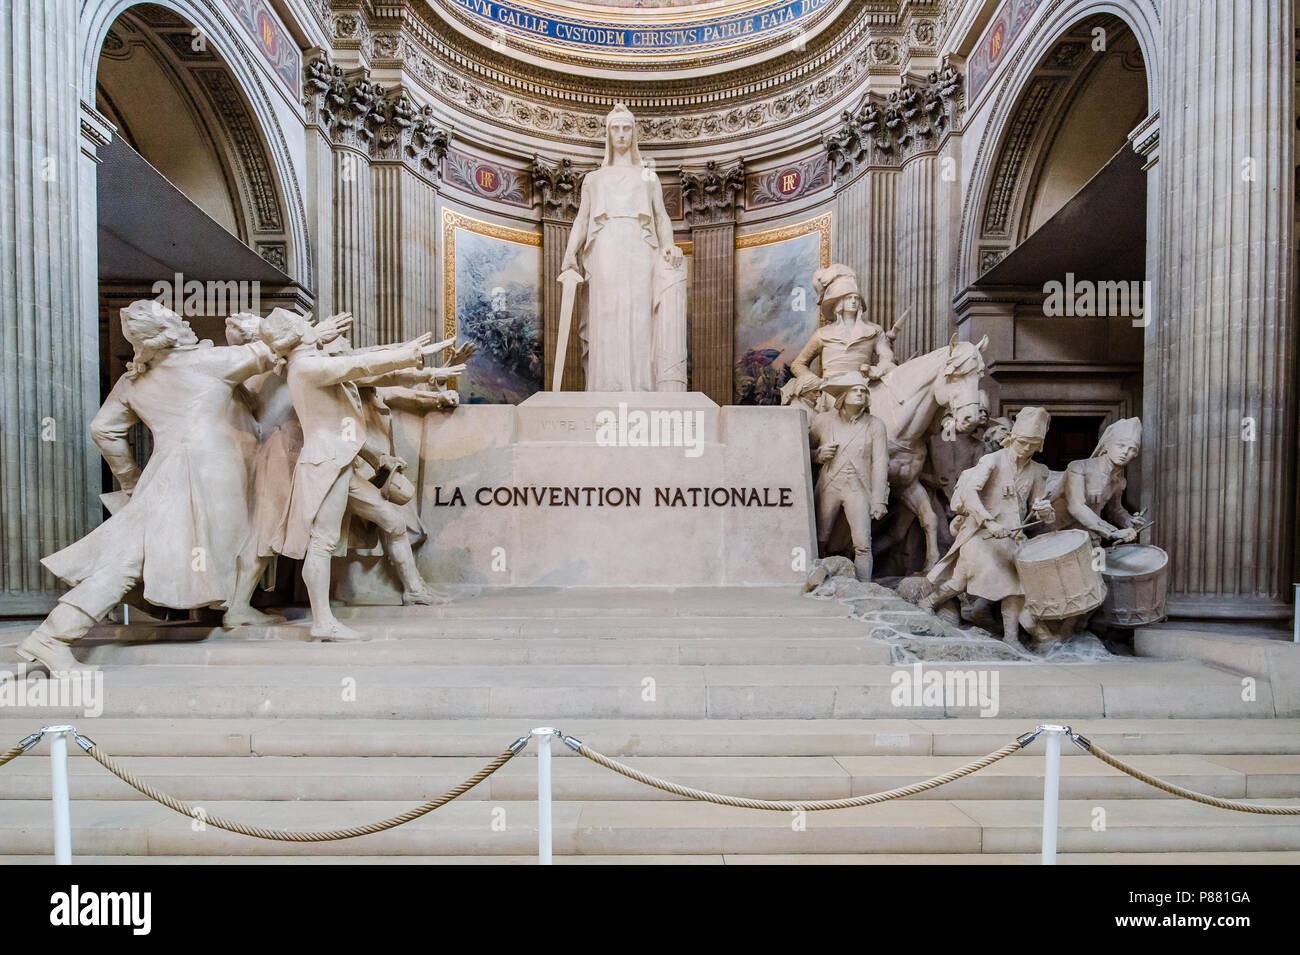 La Convention Nationale statue in the Pantheon in Paris, France Stock Photo